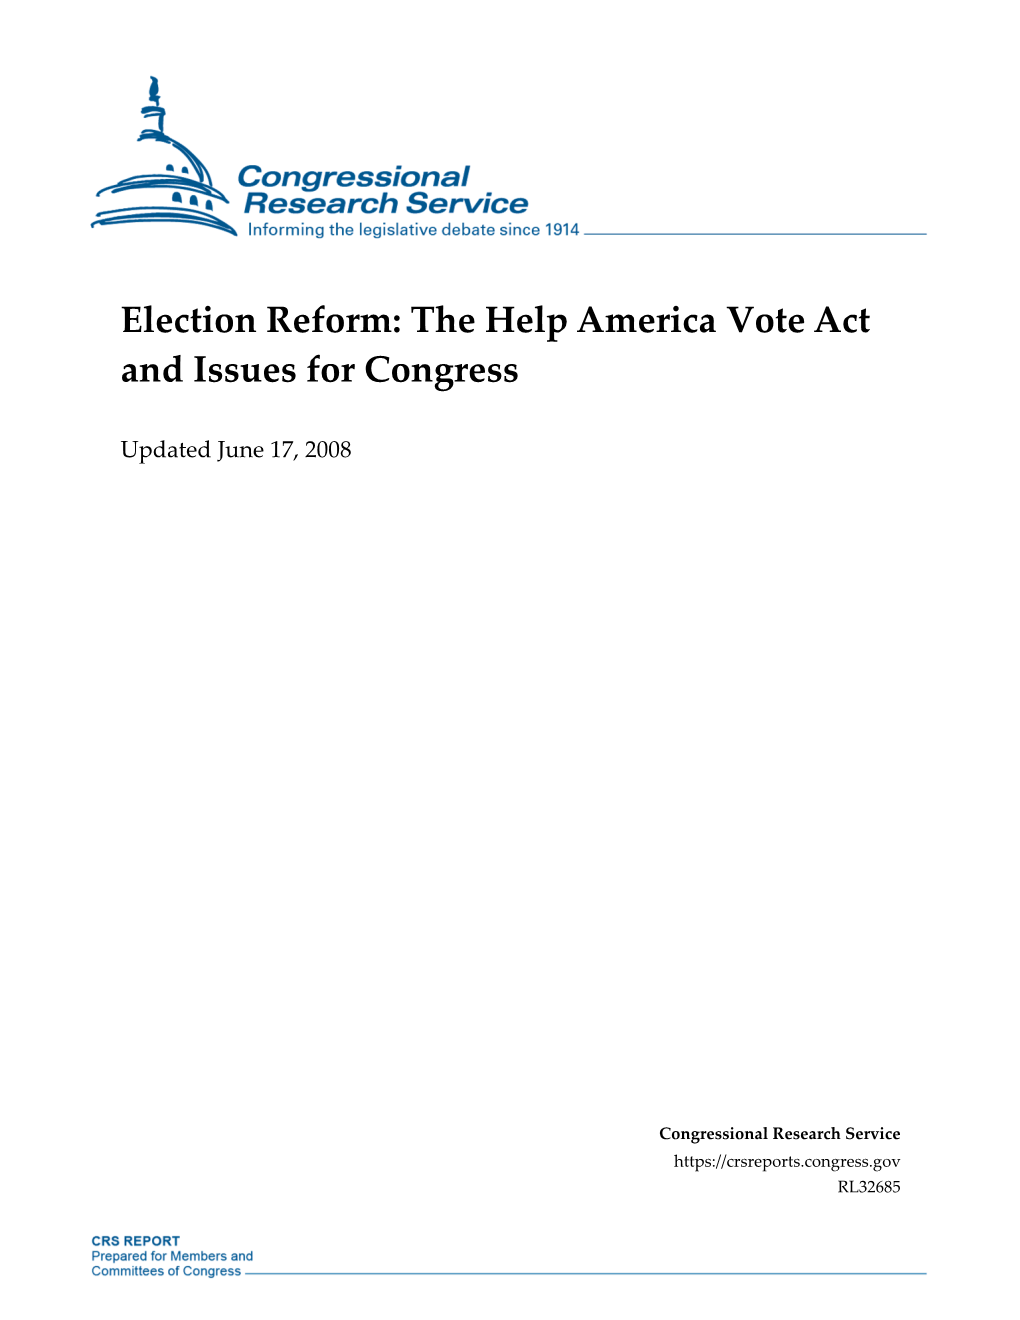 Election Reform: the Help America Vote Act and Issues for Congress